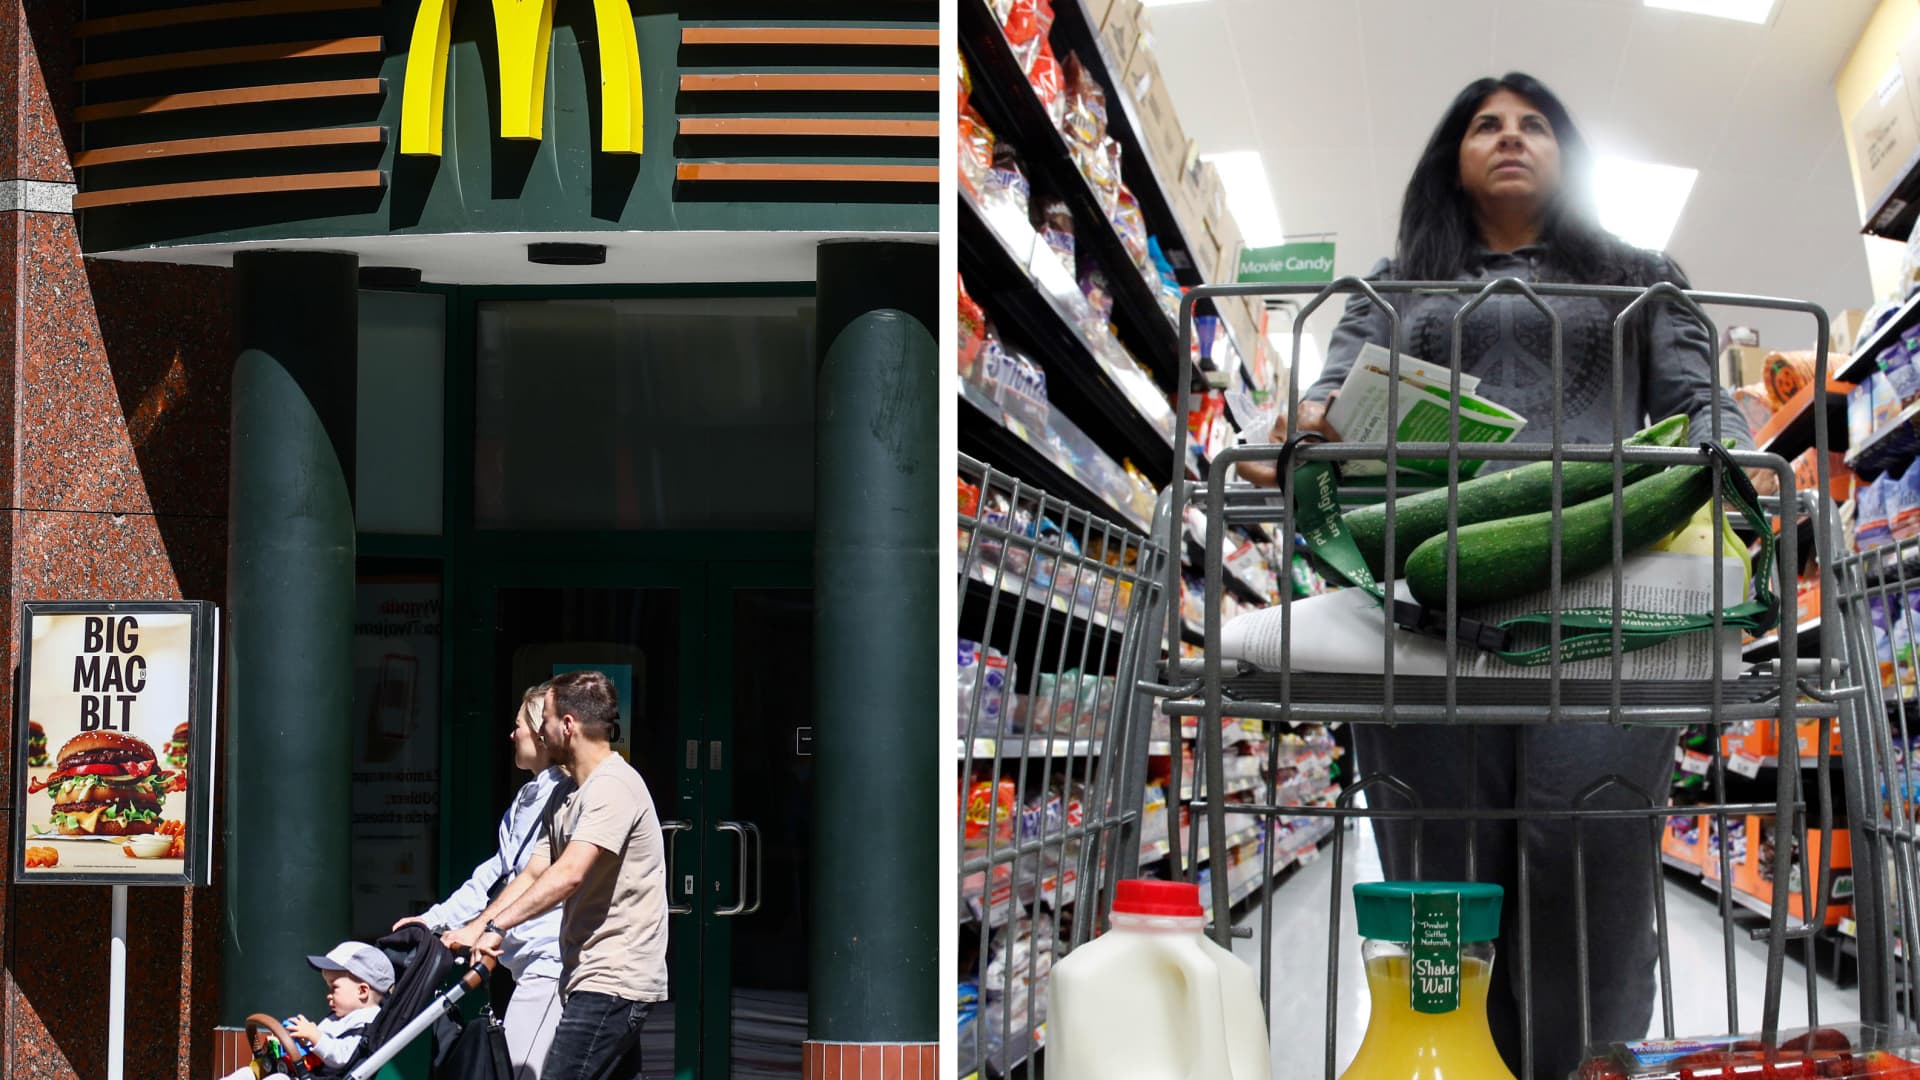 Walmart says more diners are buying its groceries as fast food gets pricey